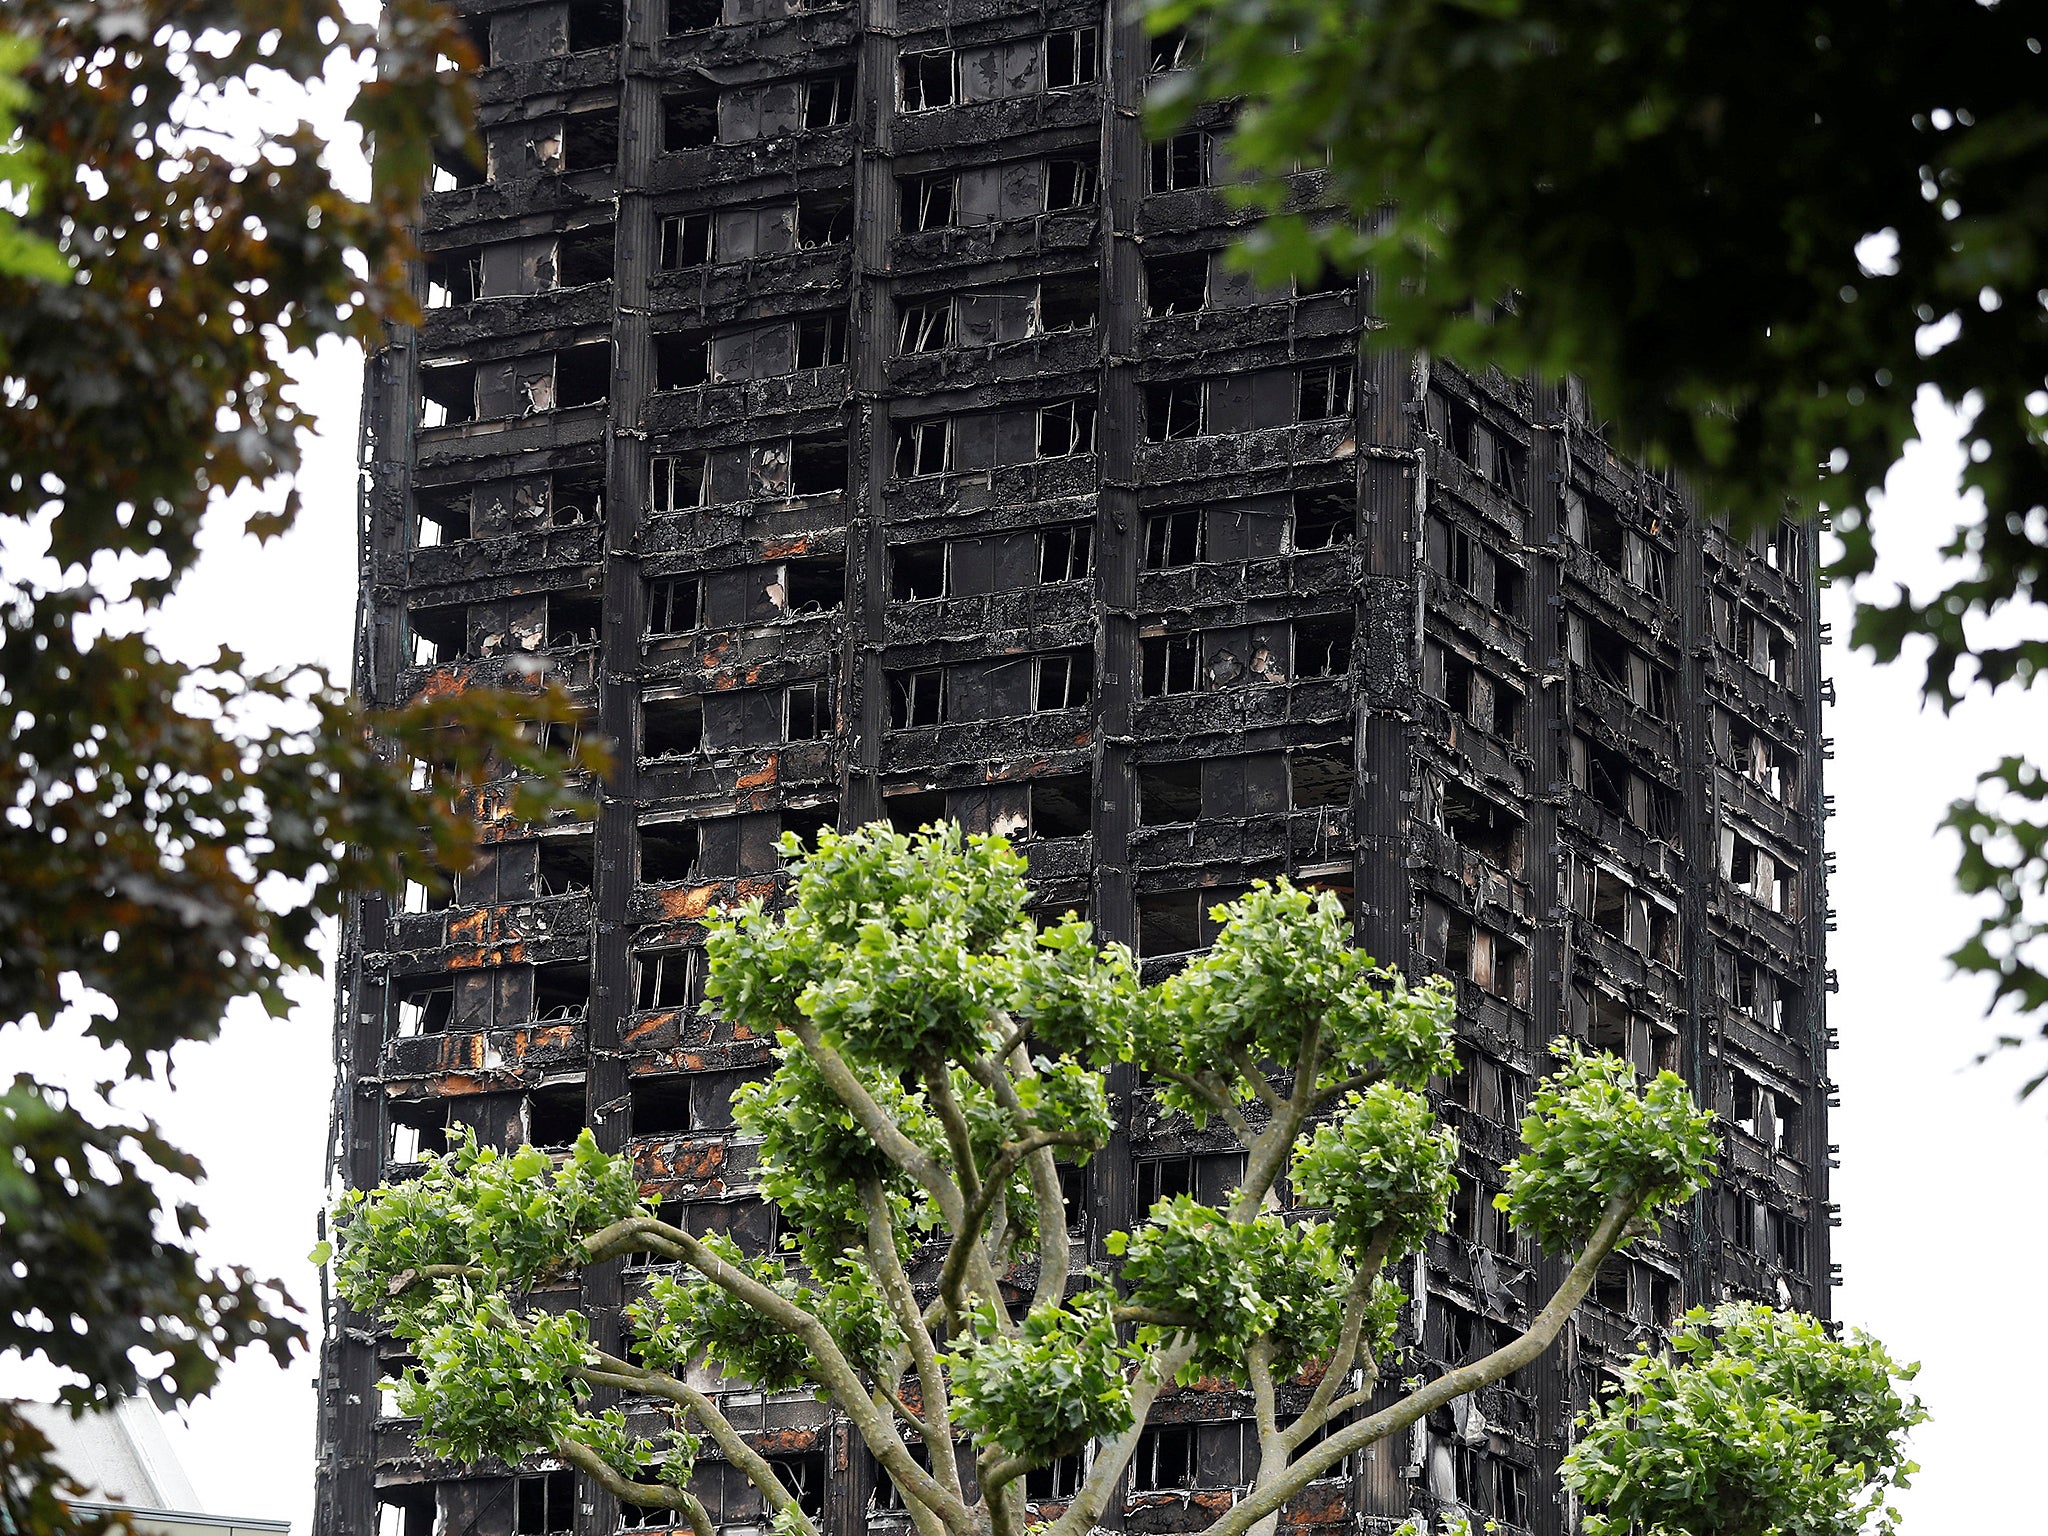 Previous estimates put the number of people living in the tower block at between 400 and 600